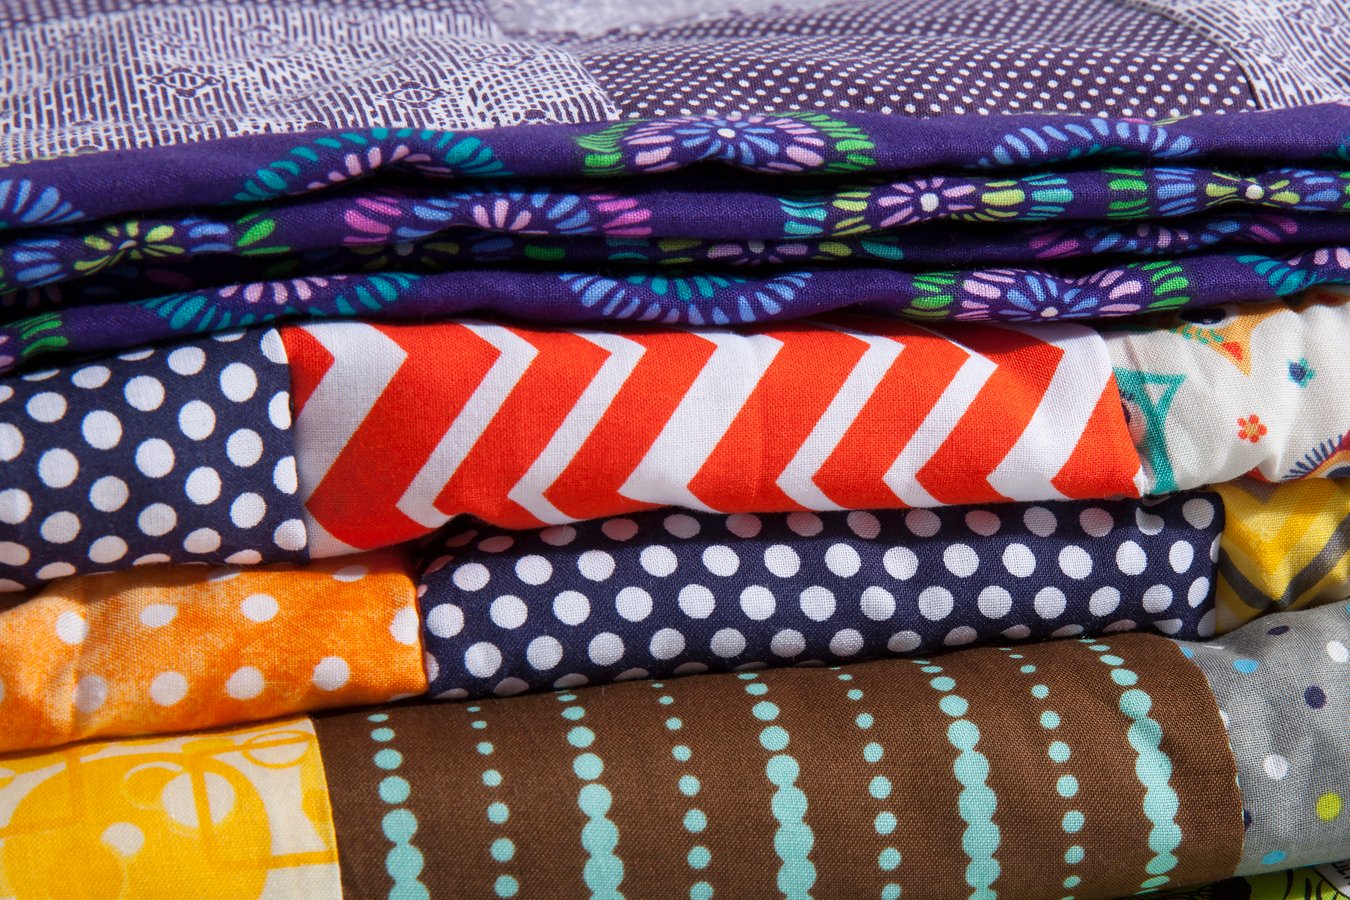 A close up of stacked quilts showing different patterns and cloth texture.